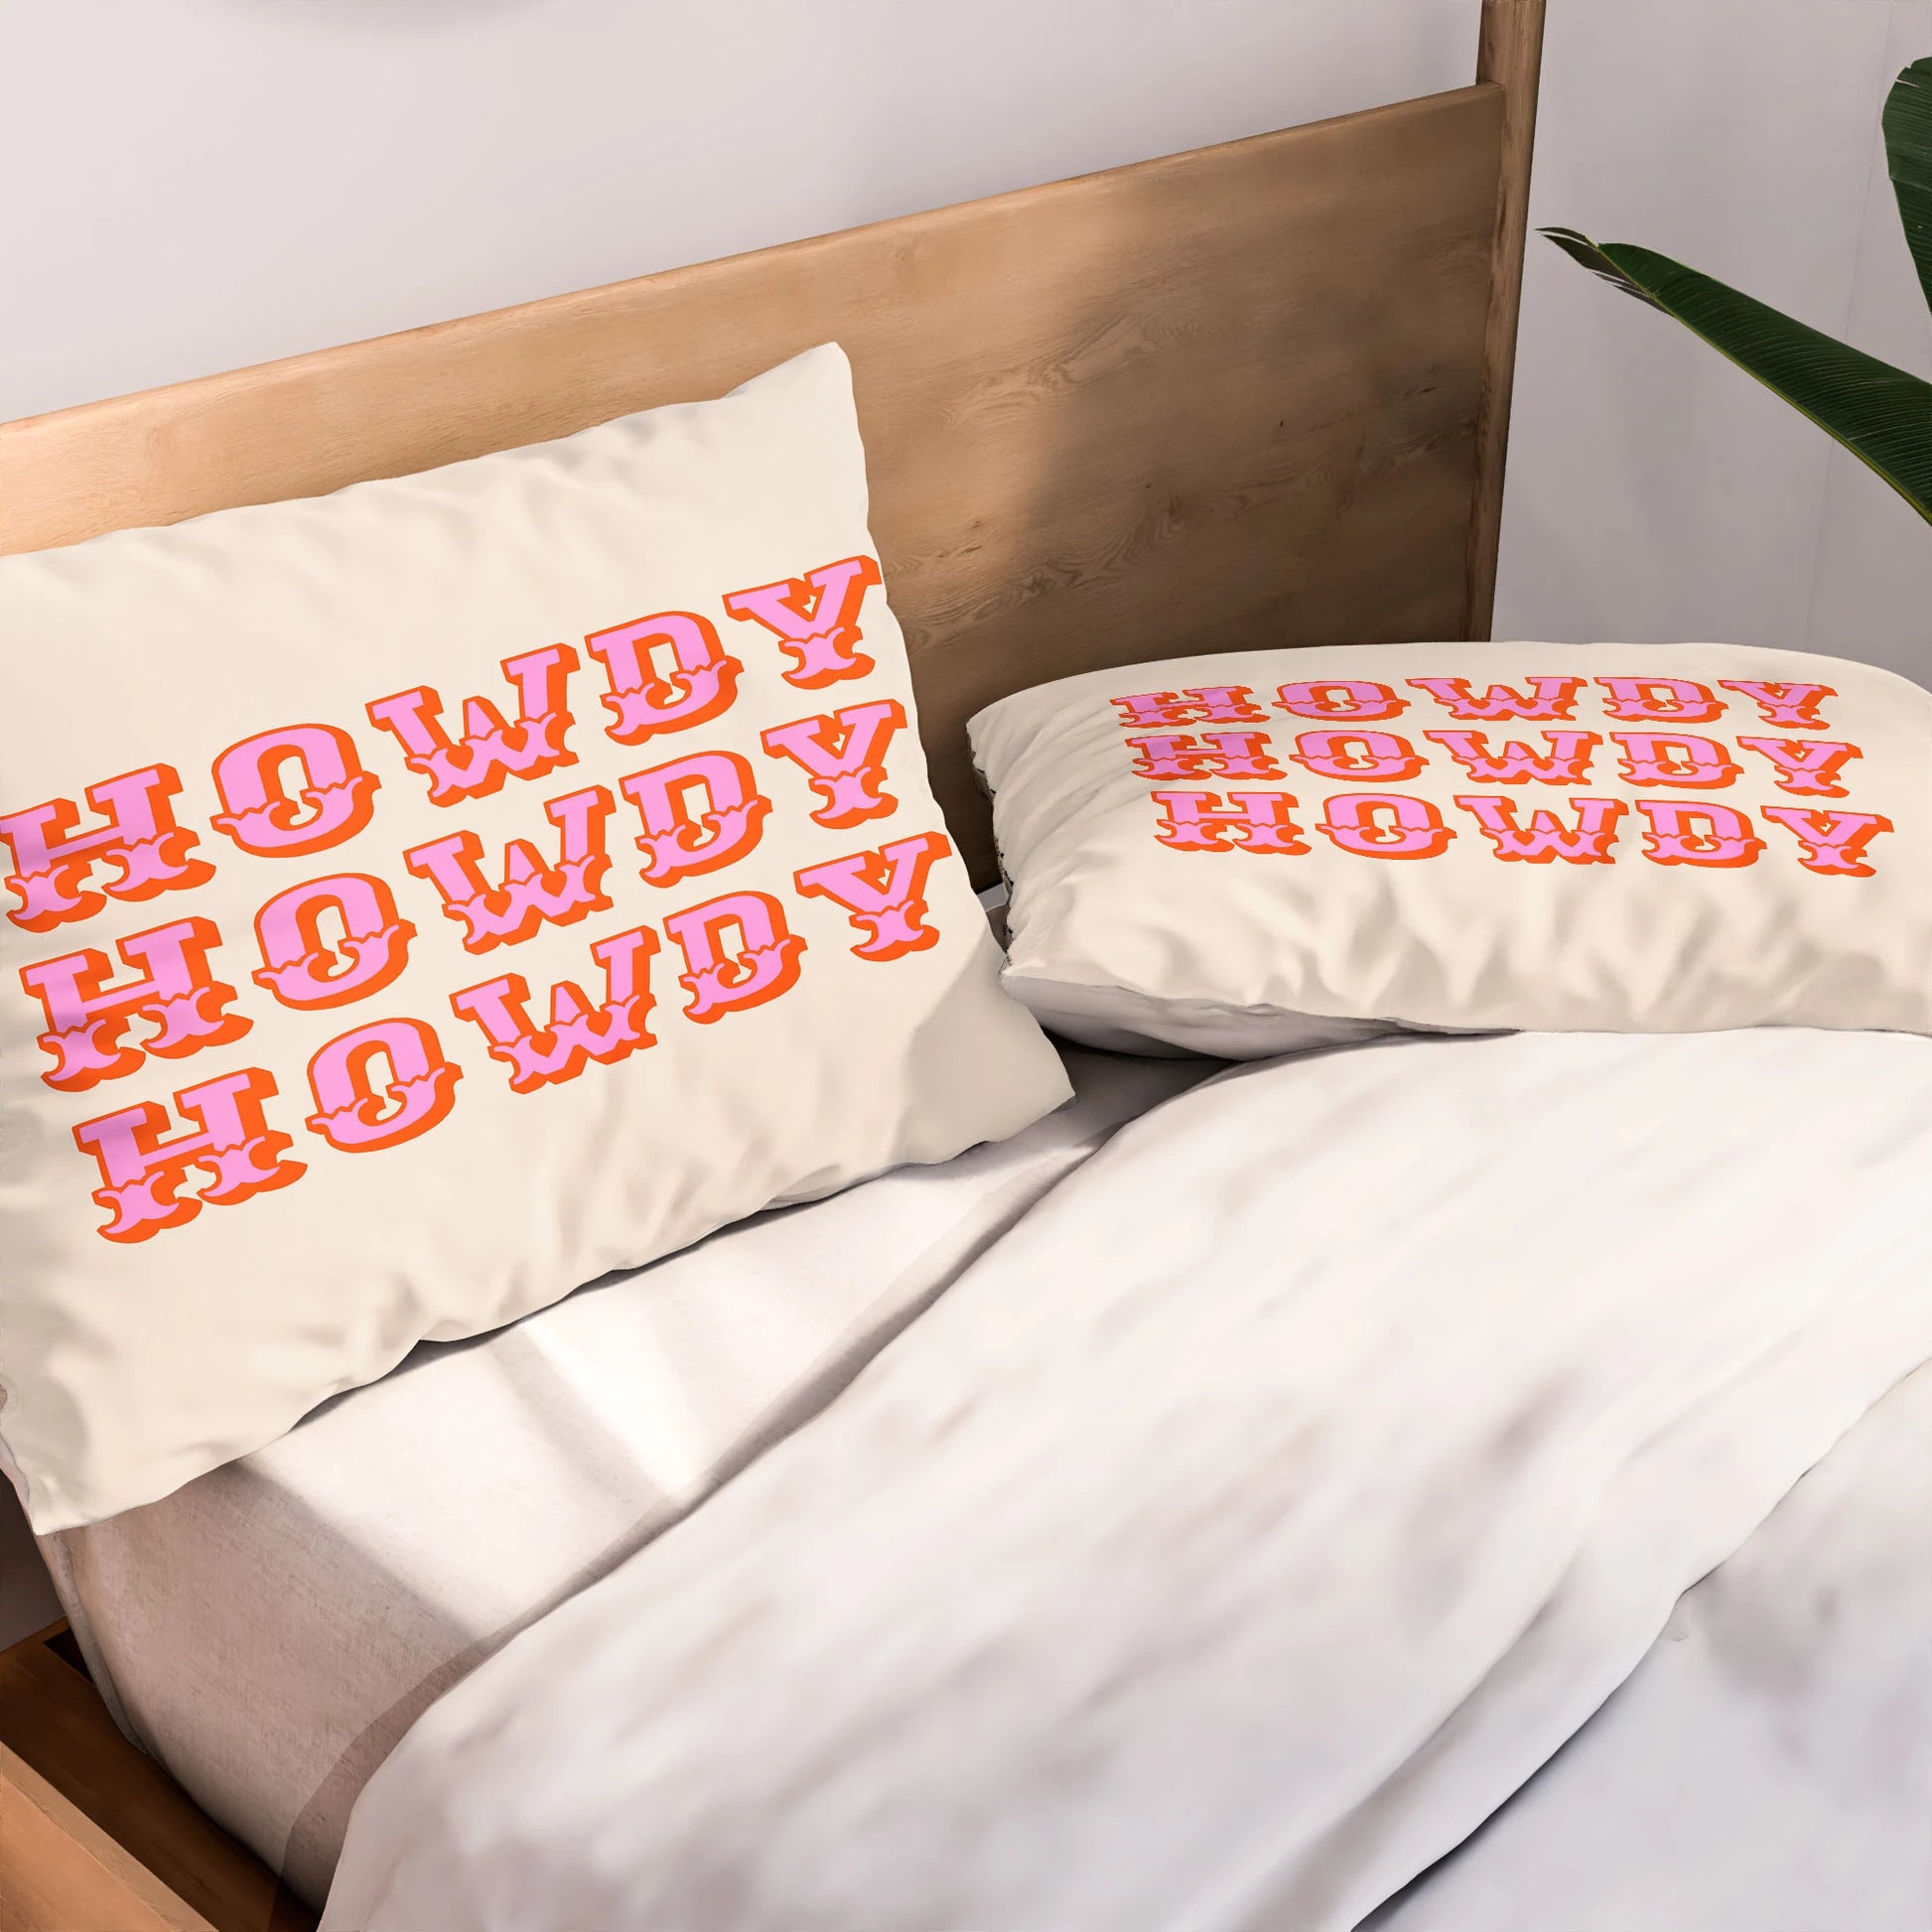 HOWDY Pillow Shams - bedding, blanket, case, cases, cowgirl, cowgirl style, cowgirlstyle, decor, farm, home, howdy, pillow, pillow case, pillow sham, pillow shams, pillows, pillowsham, ranch, ranchhome, southwestern, western, western bedding, western pillow, westernbedding - howdy - Baha Ranch Western Wear